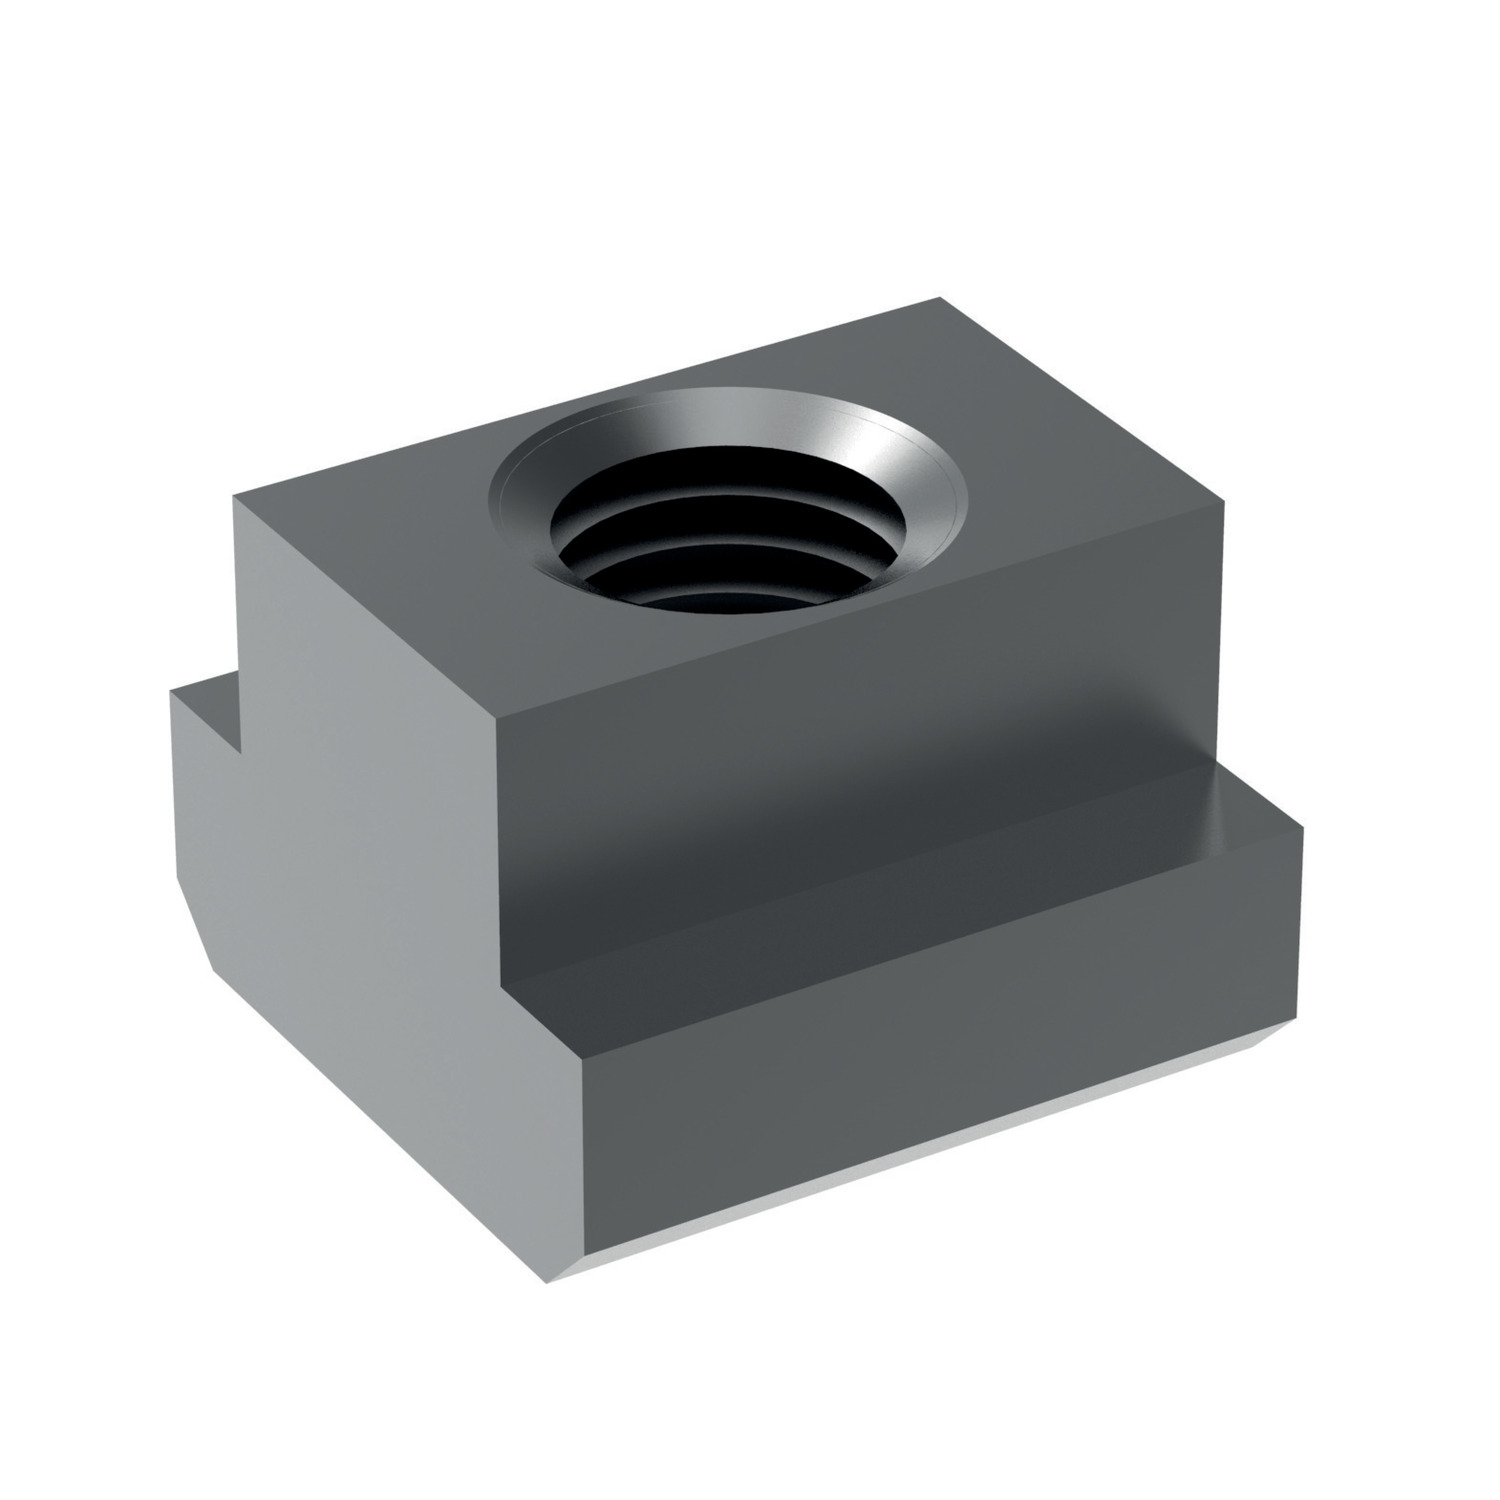 T-Nuts - Steel T-nuts, rhombus t-nuts, extended t-nuts and semi-finished t-nuts available in a wide range of different standards, sizes, materials and finishes.